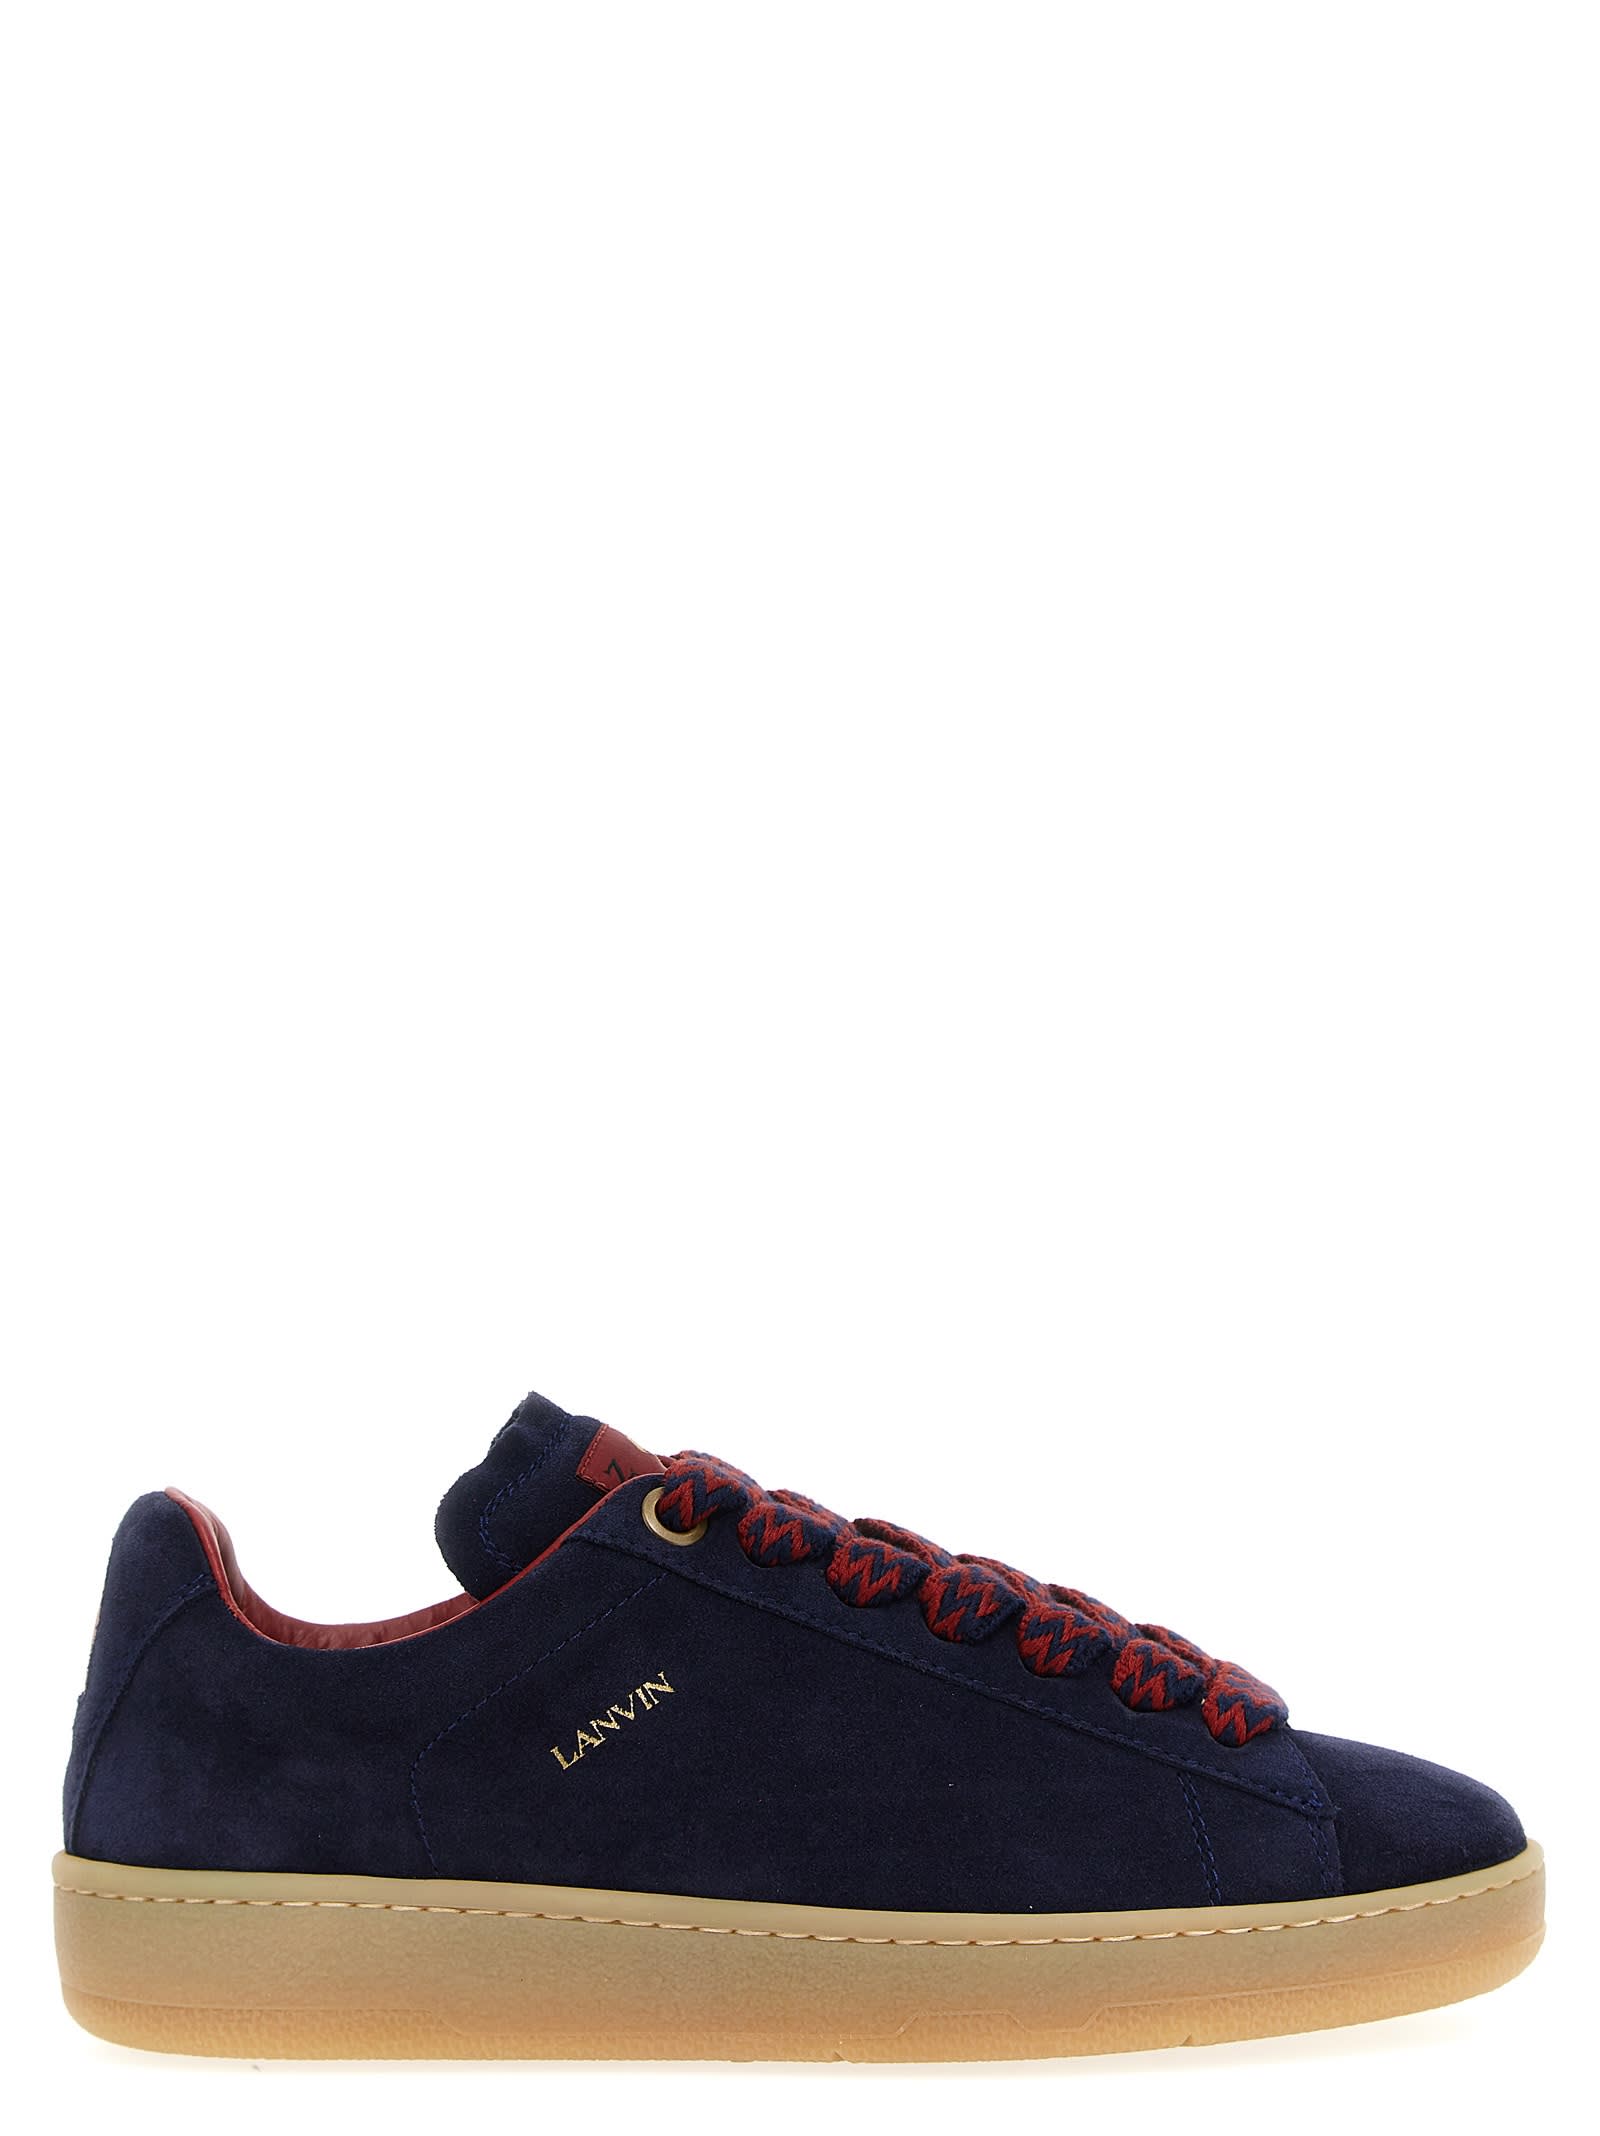 Lanvin Lite Curb Trainers In Navy Blue/red